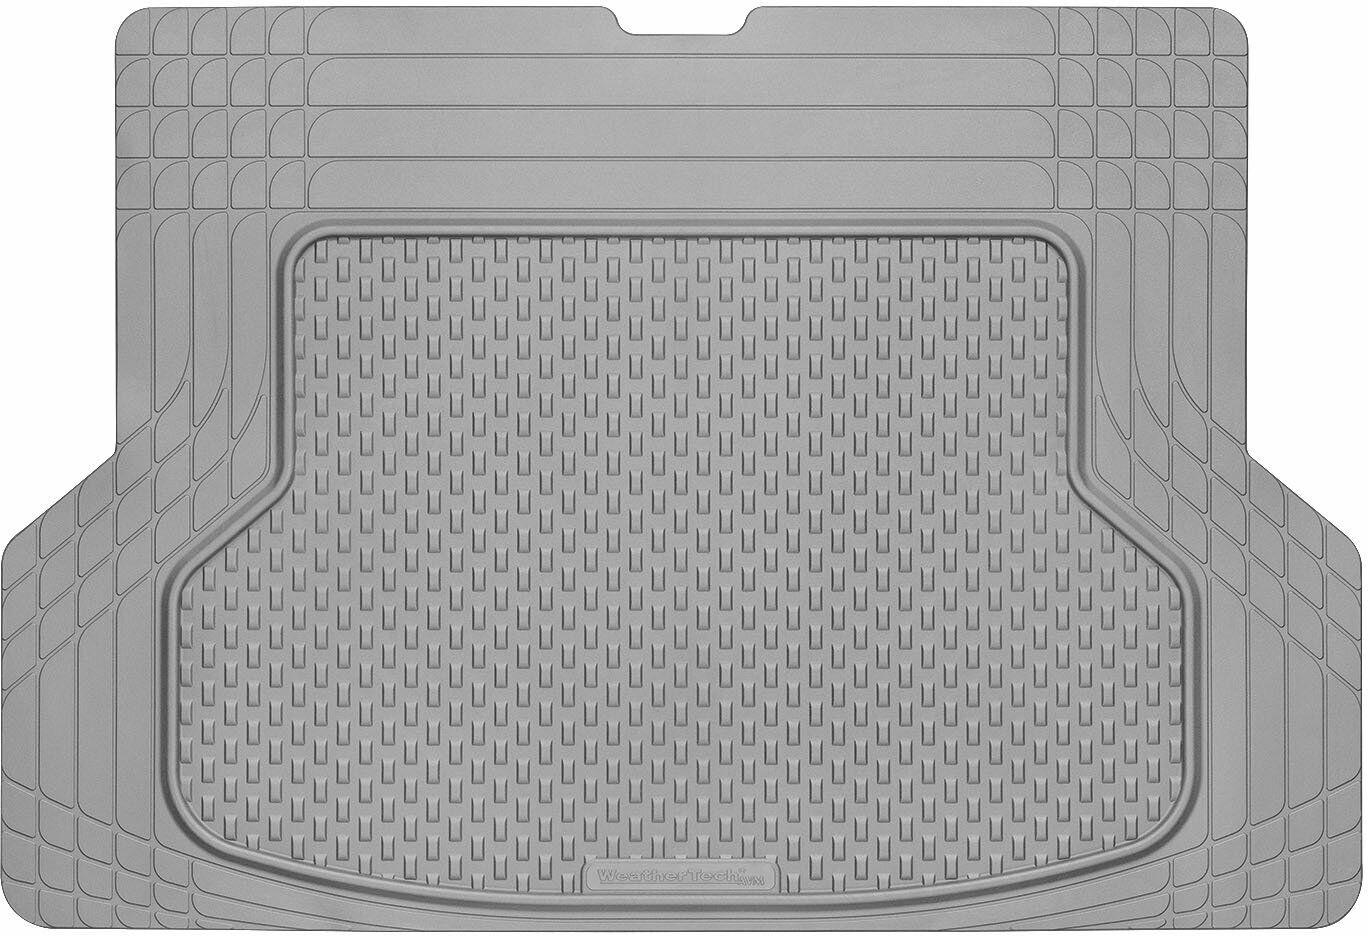 WeatherTech 3-Piece Trim-to-Fit Over The Hump Mat Set for $27.99 Shipped